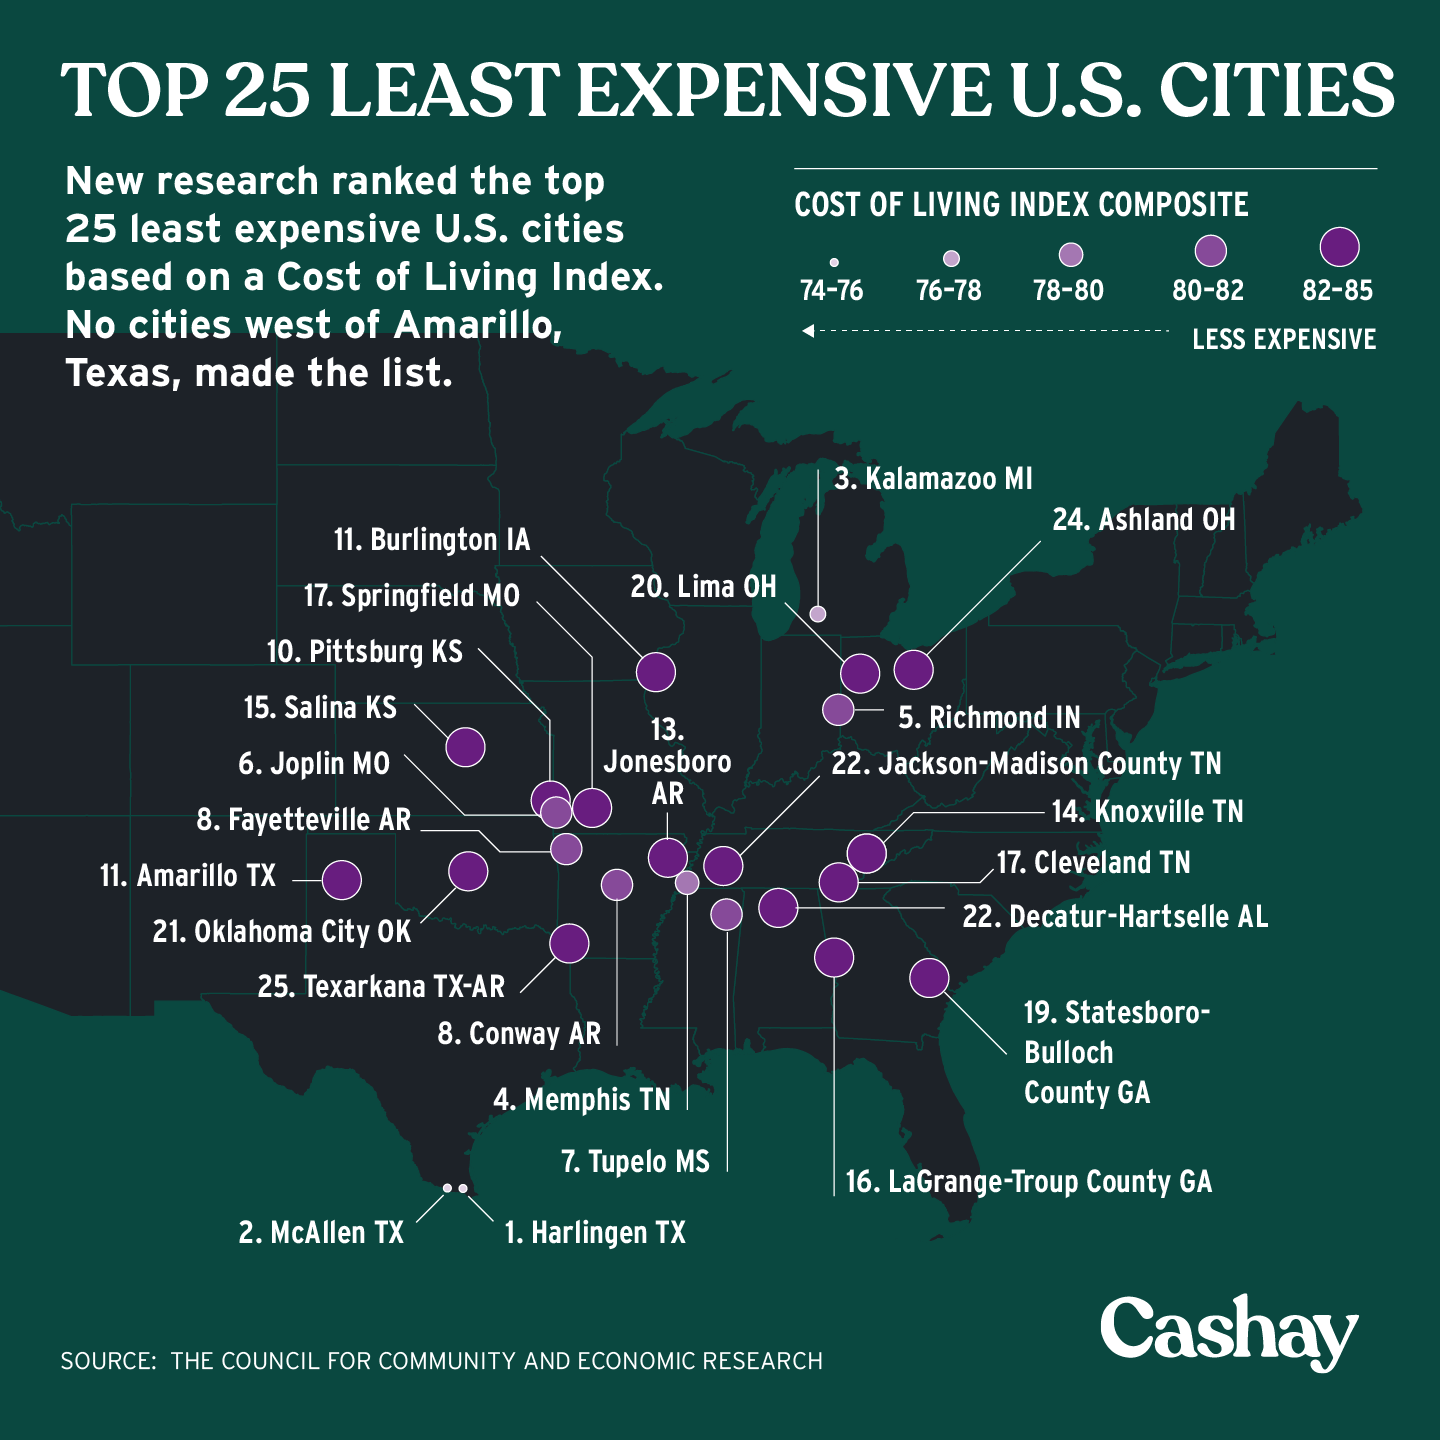 The 25 least expensive U.S. cities to live in Cashay